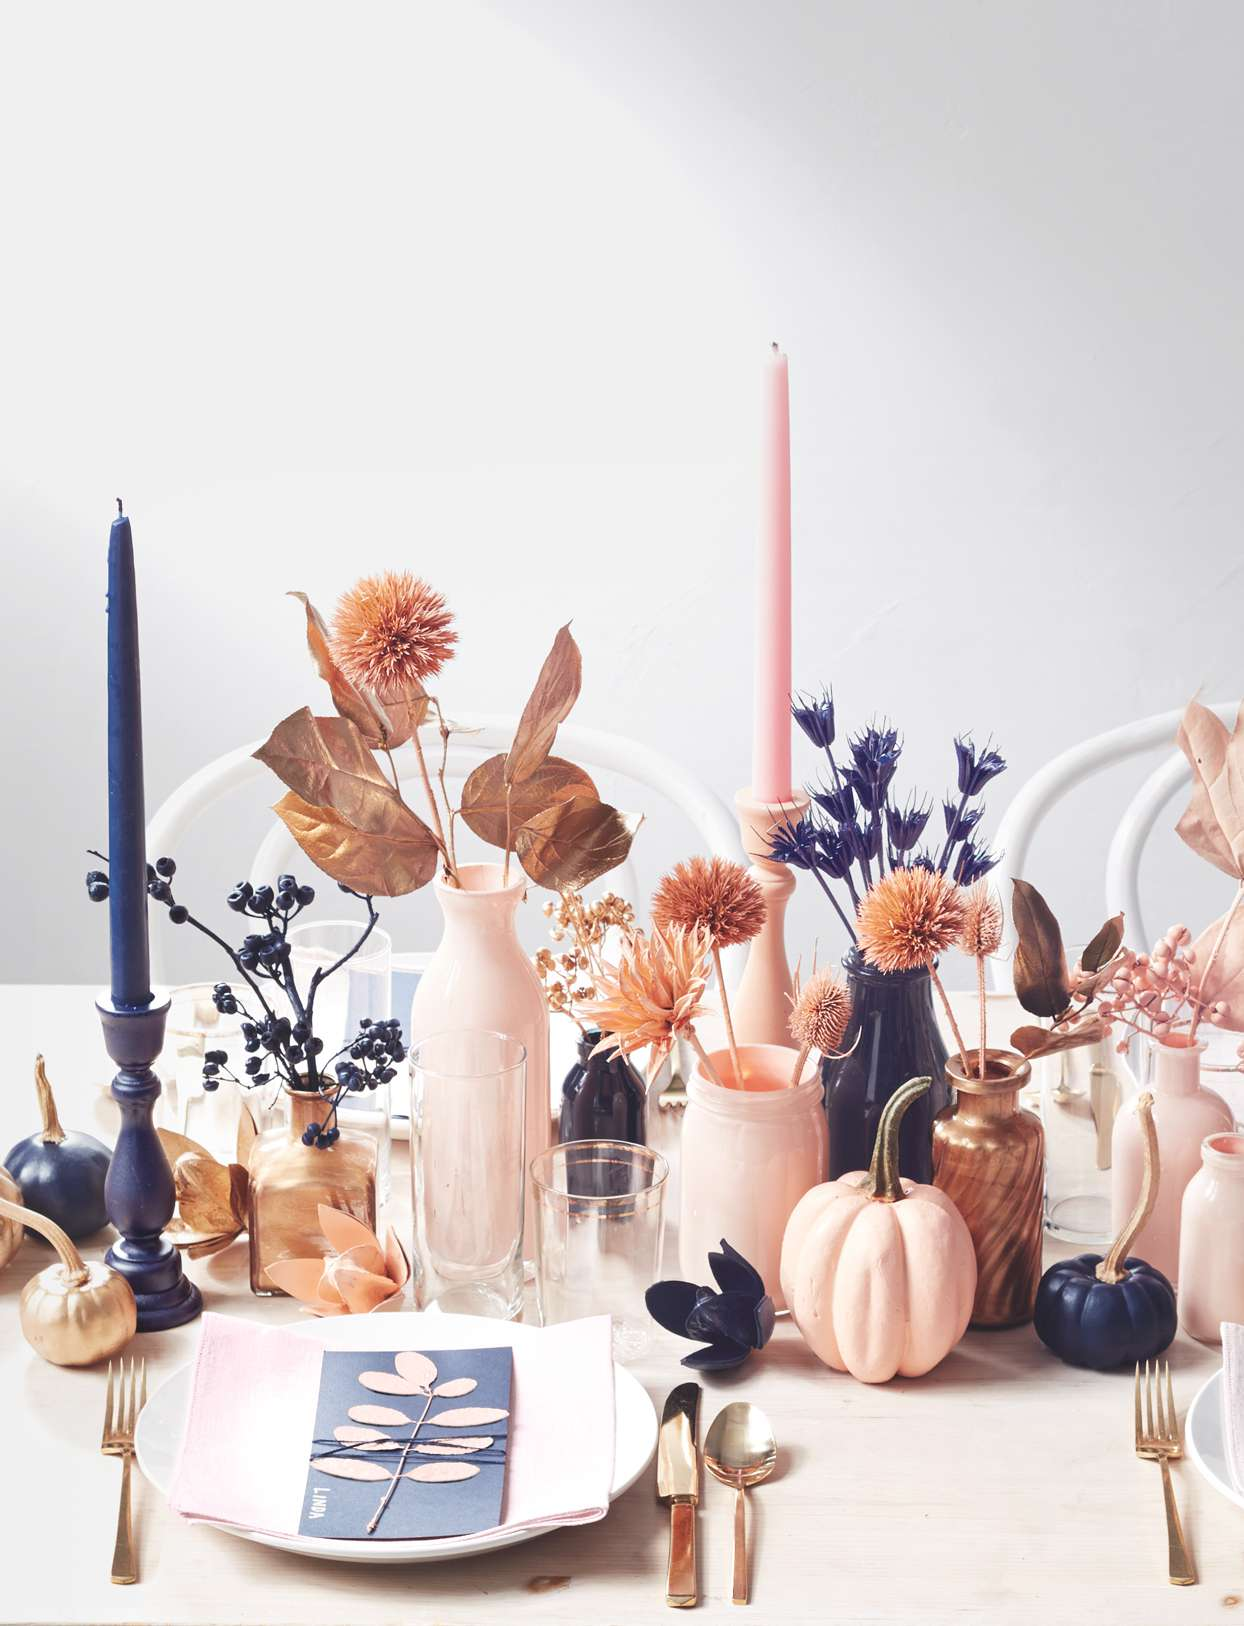 7 Centerpiece Ideas For Any Kind Of Party 